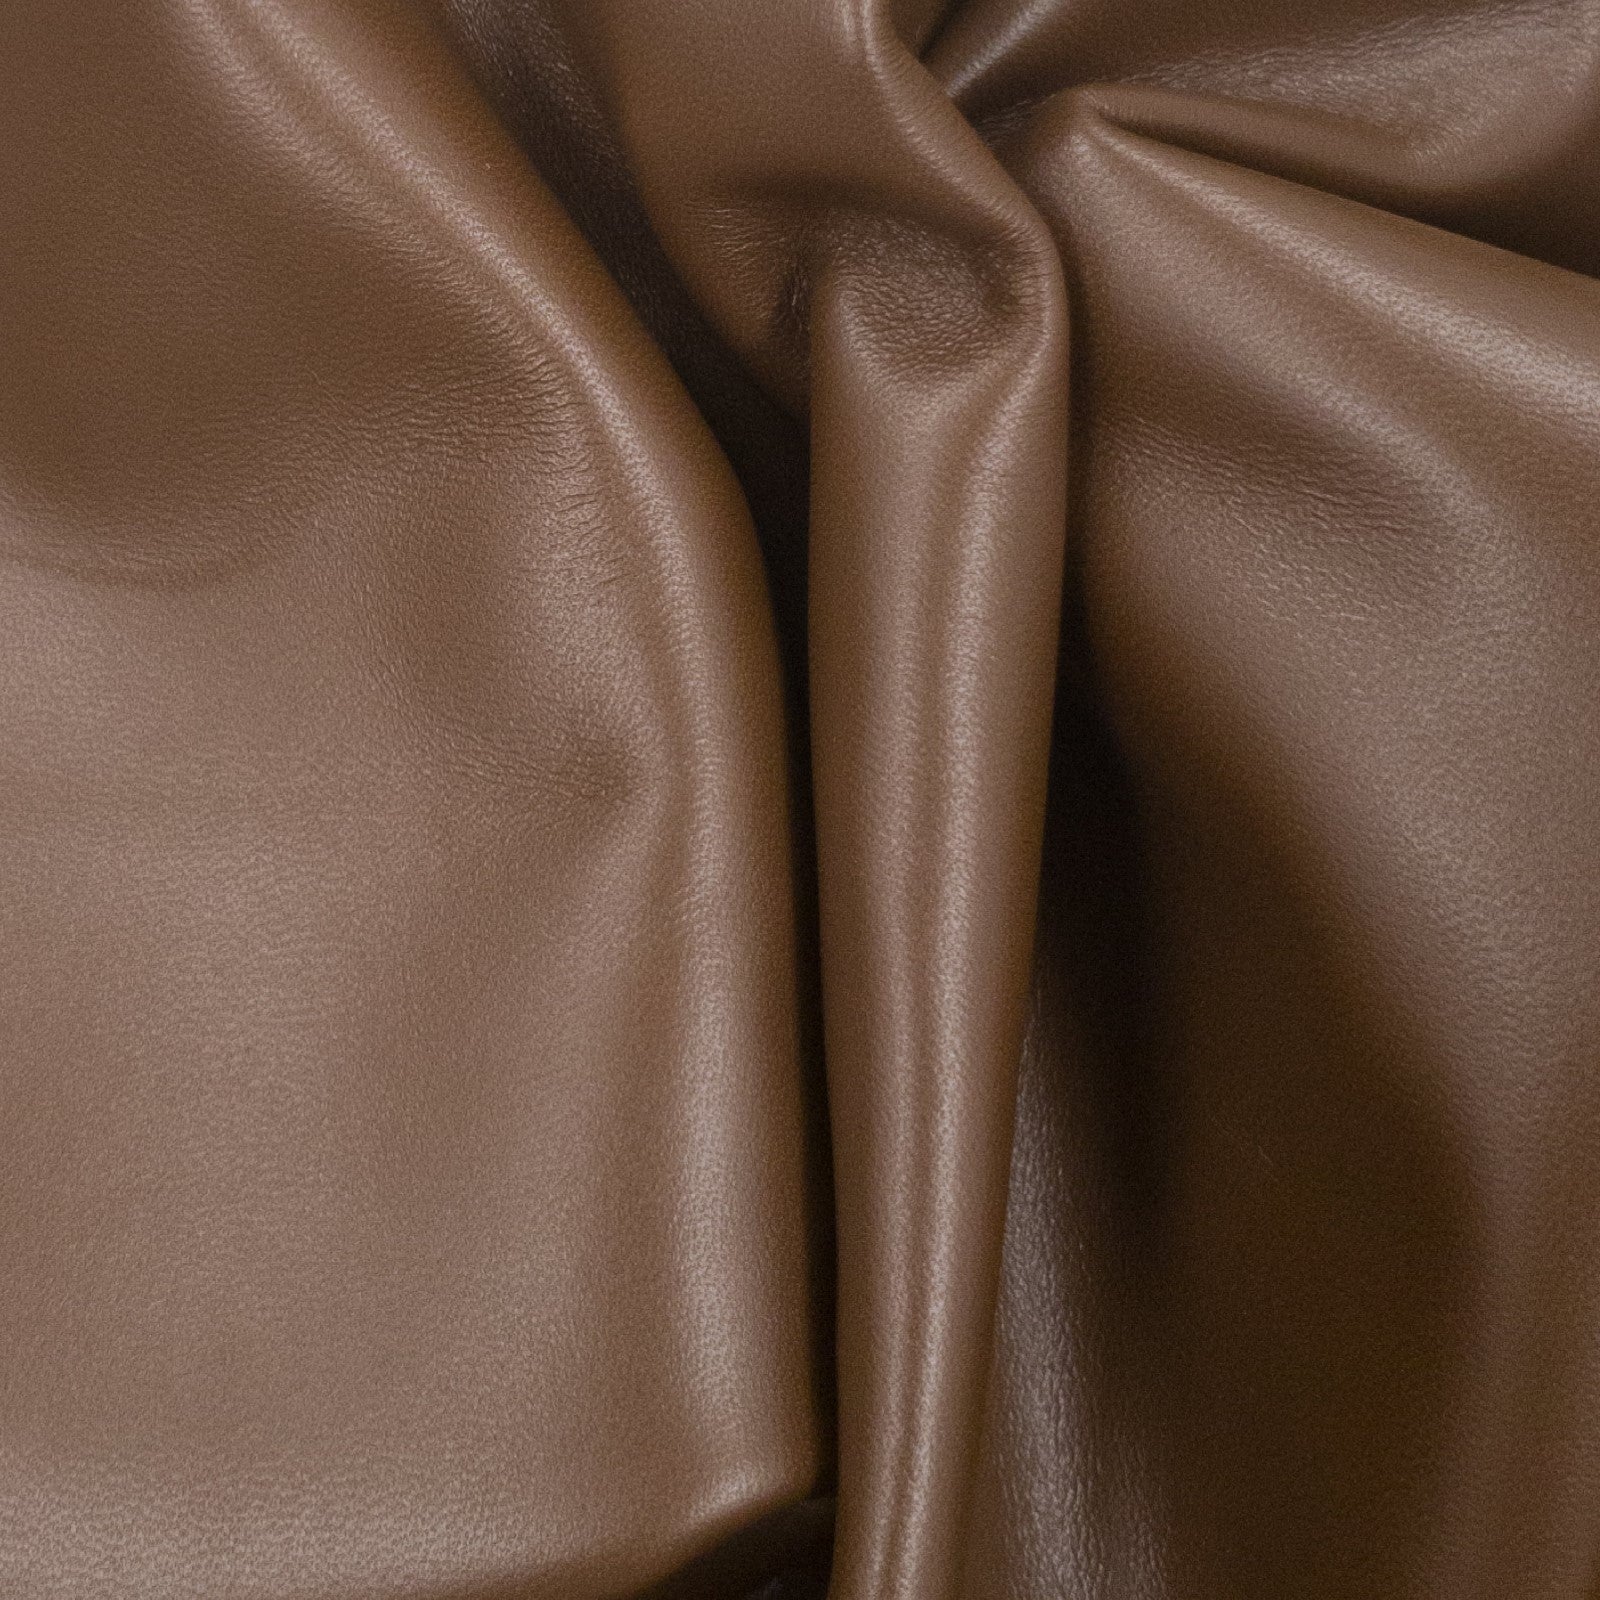 Medium Browns, 3-10 Sq Ft, 1-3 oz, Lamb Hides, Maple Syrup Brown / 5-6 / 1-2 oz (.4-.8 MM) | The Leather Guy